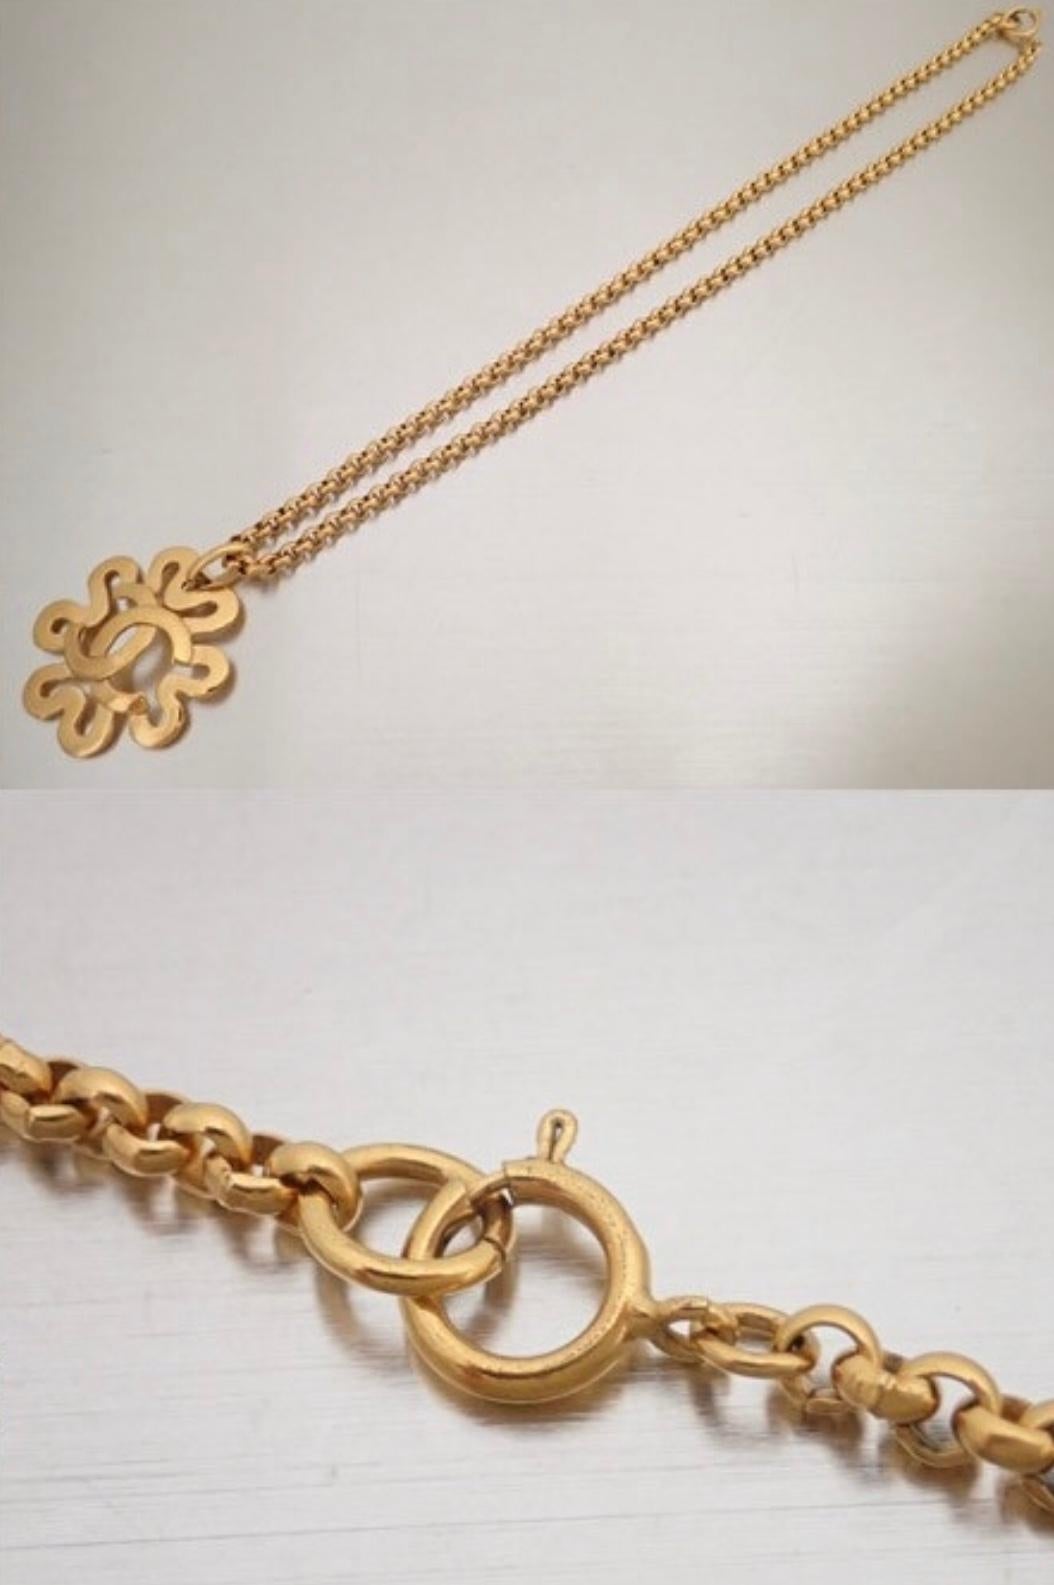 Vintage CHANEL golden chain necklace with wavy petal frame & CC mark pendant top In Good Condition For Sale In Kashiwa, Chiba